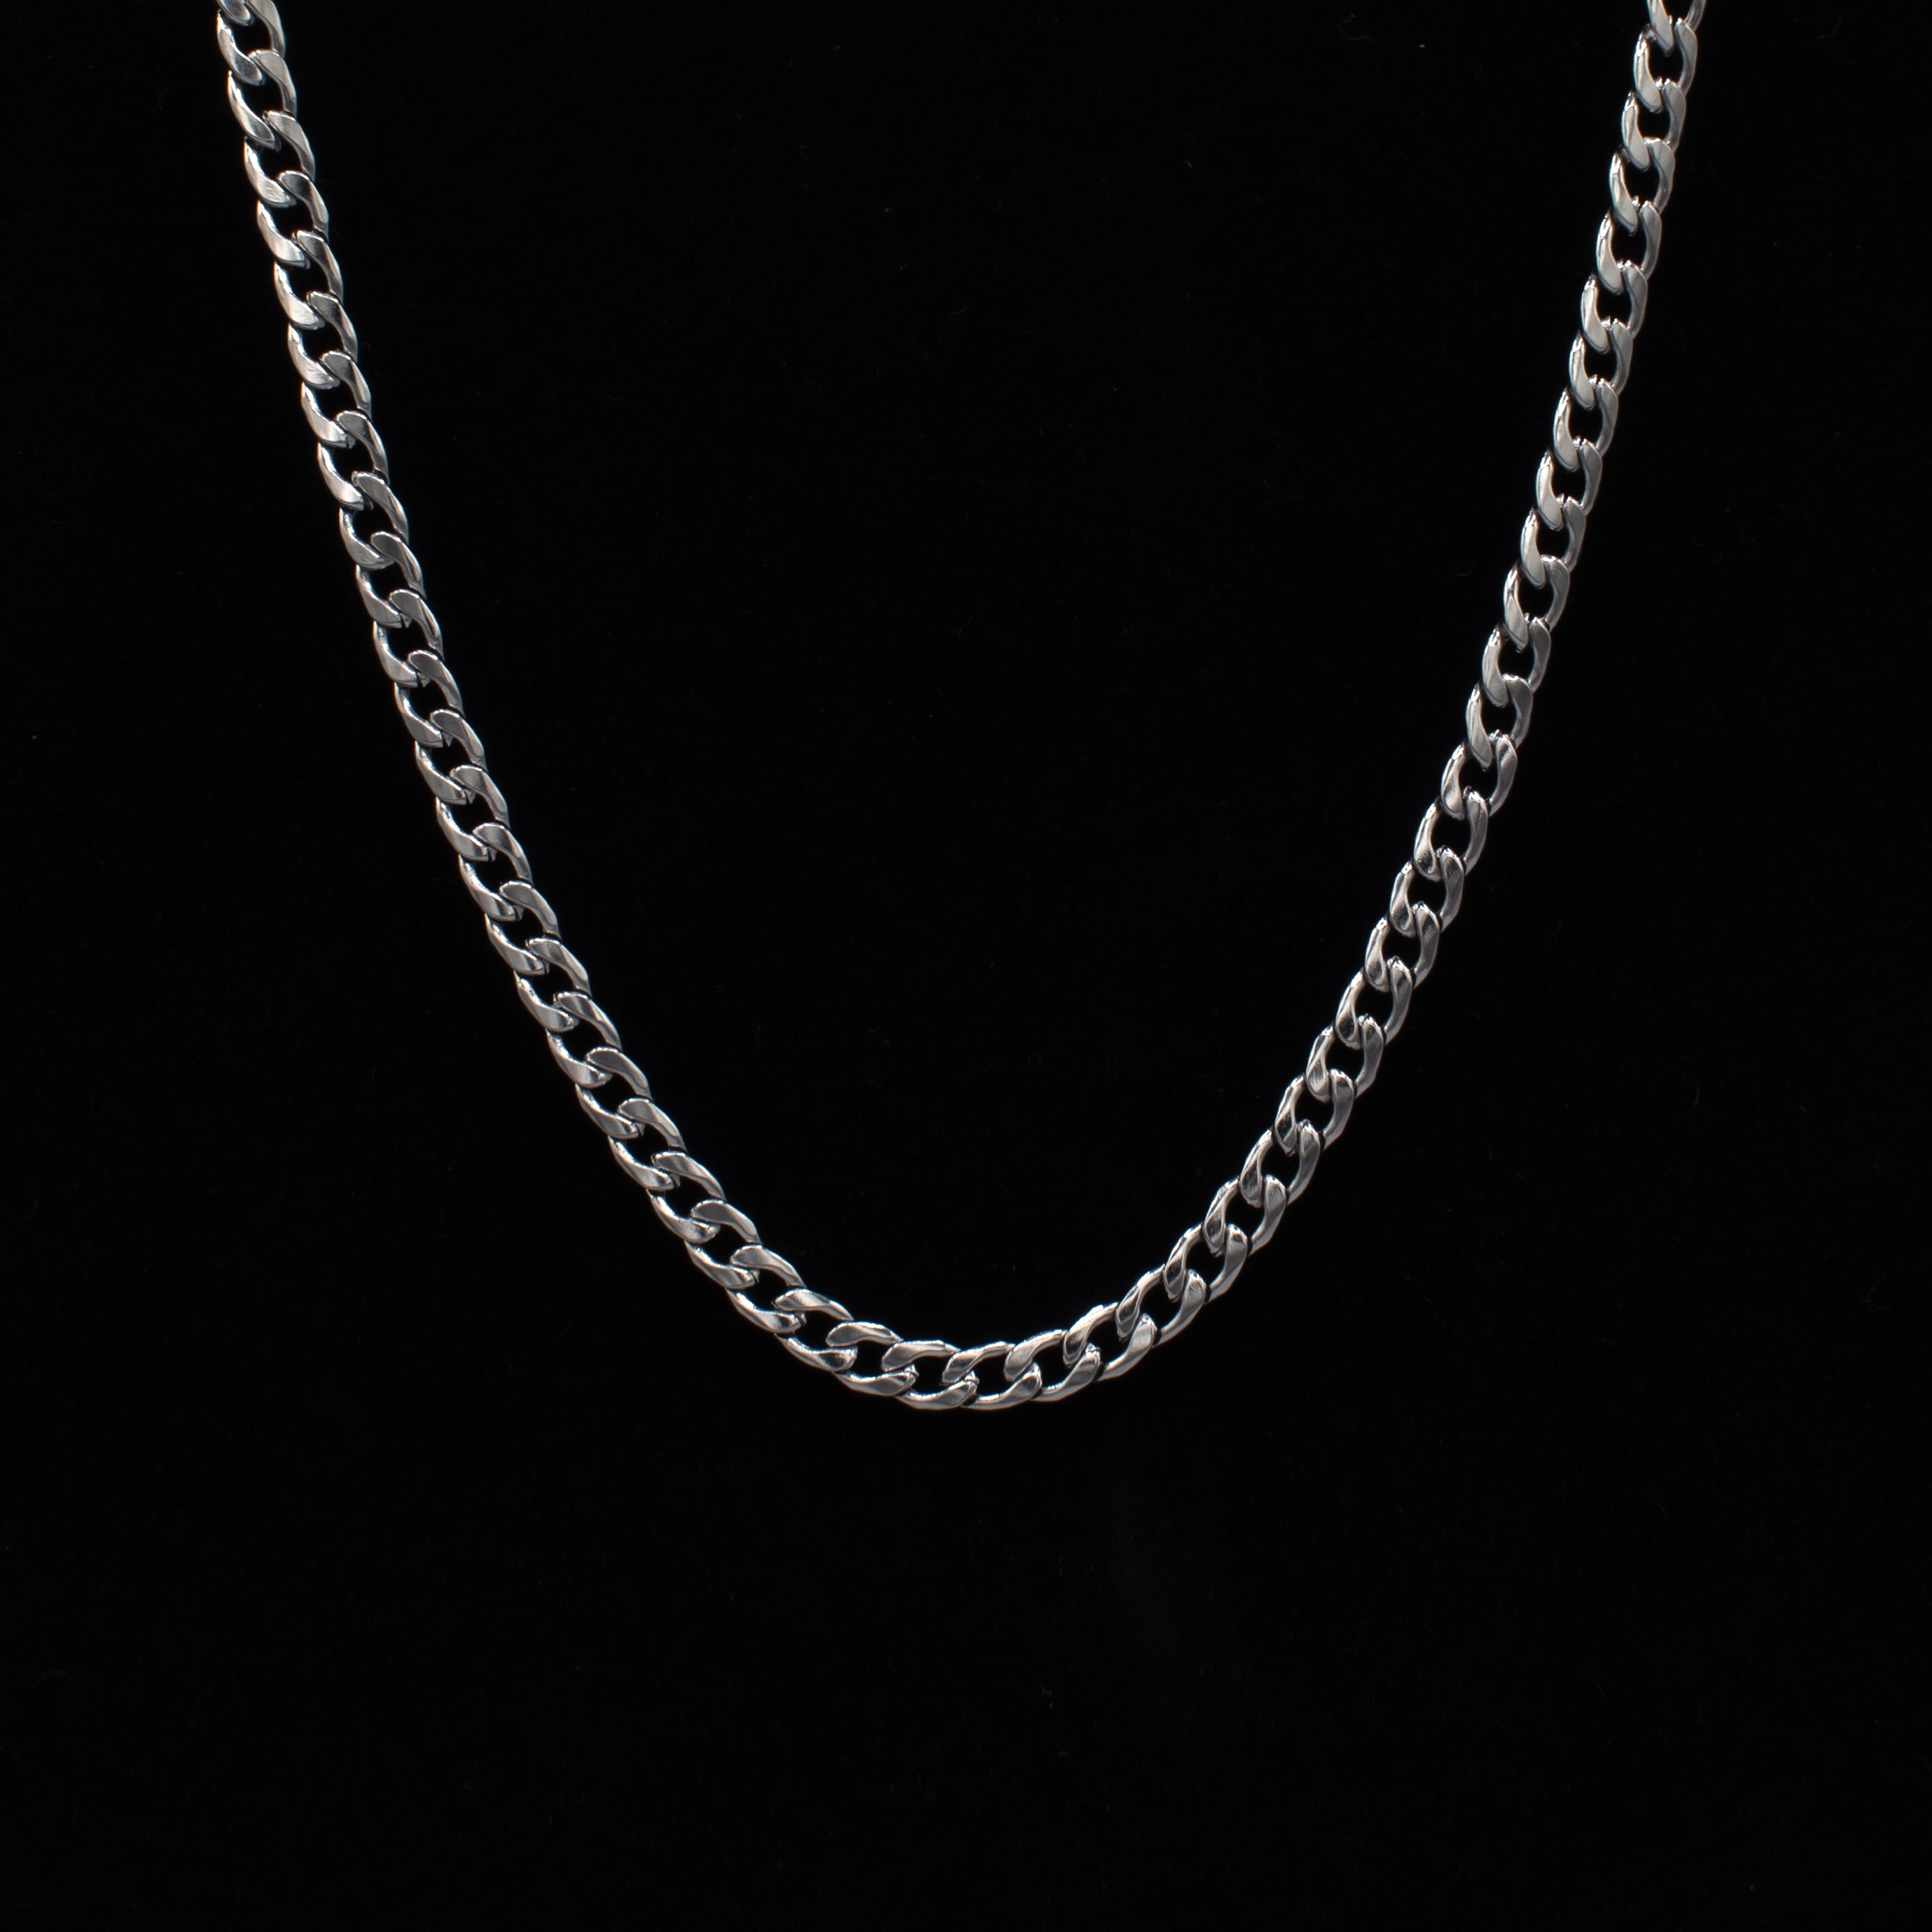 5mm stainless steel cuban necklace